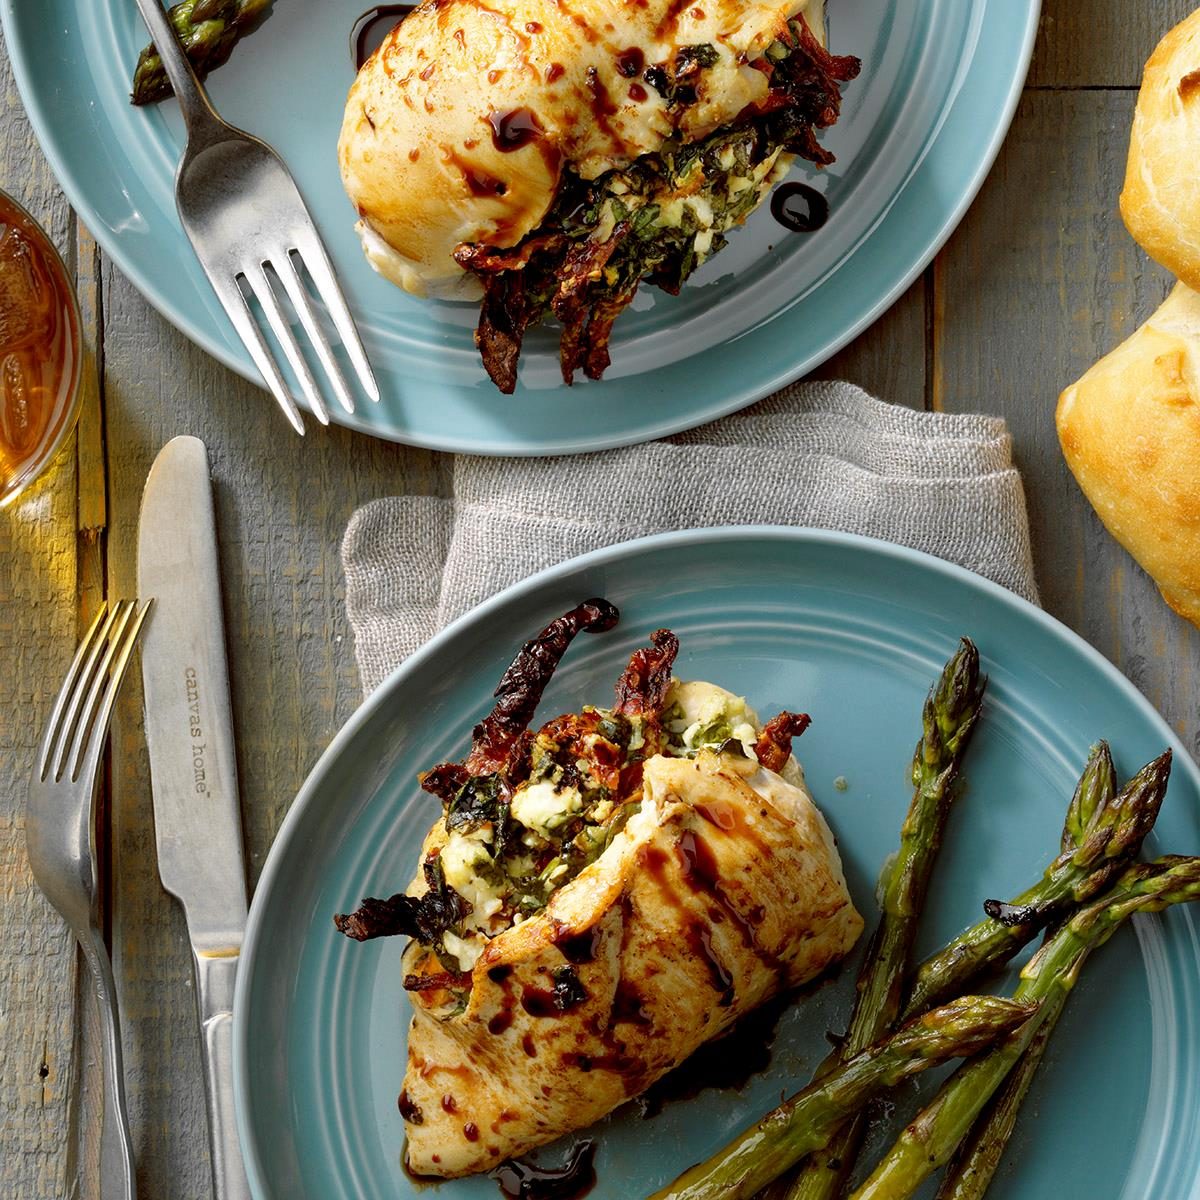 March: Goat Cheese and Spinach Stuffed Chicken